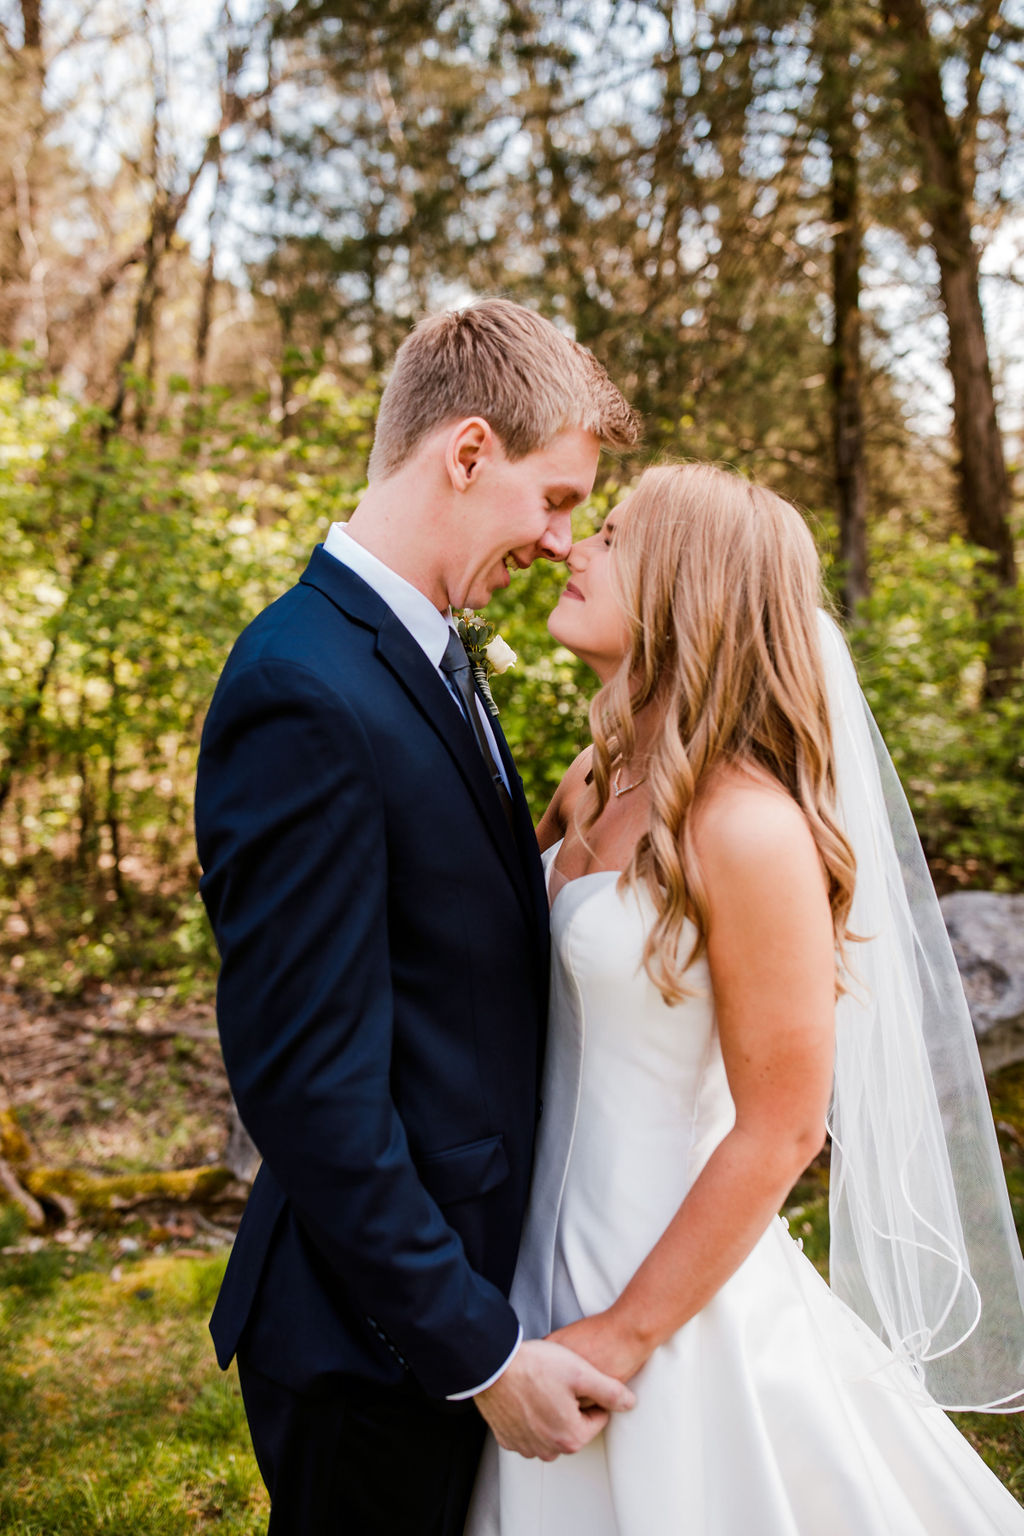 Outdoor Wedding Photos: Beautiful Graystone Quarry Wedding captured by John Myers Photography & Videography